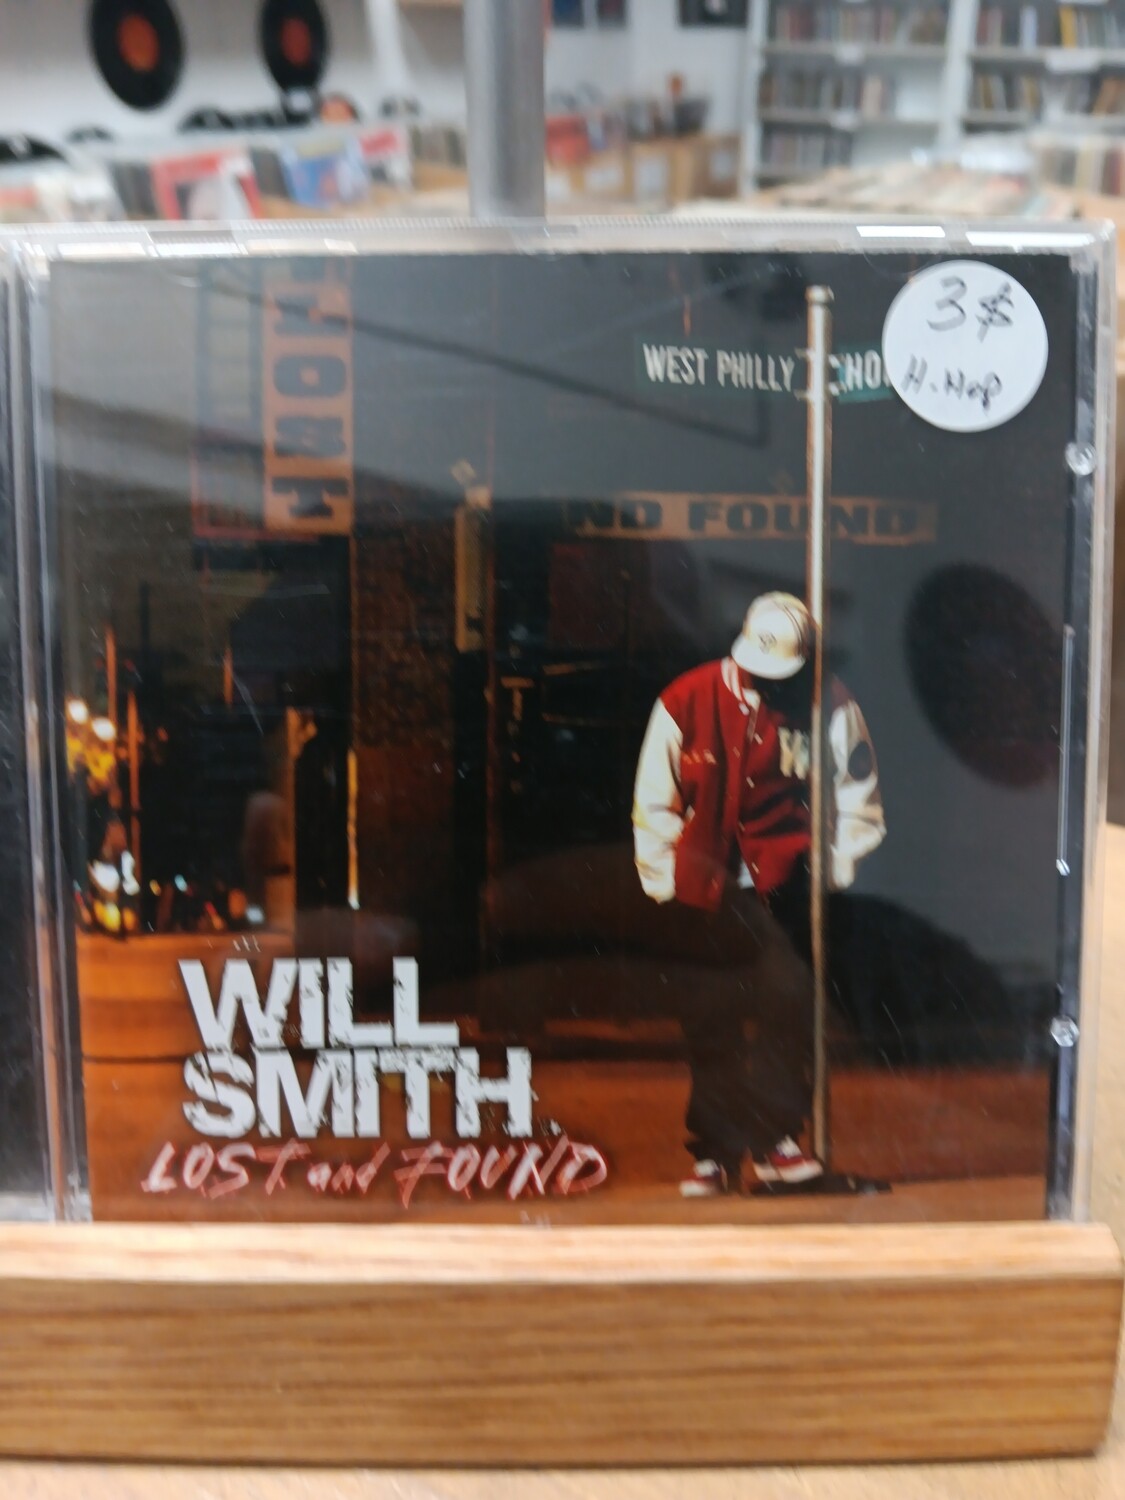 WILL SMITH - Lost and found (CD)